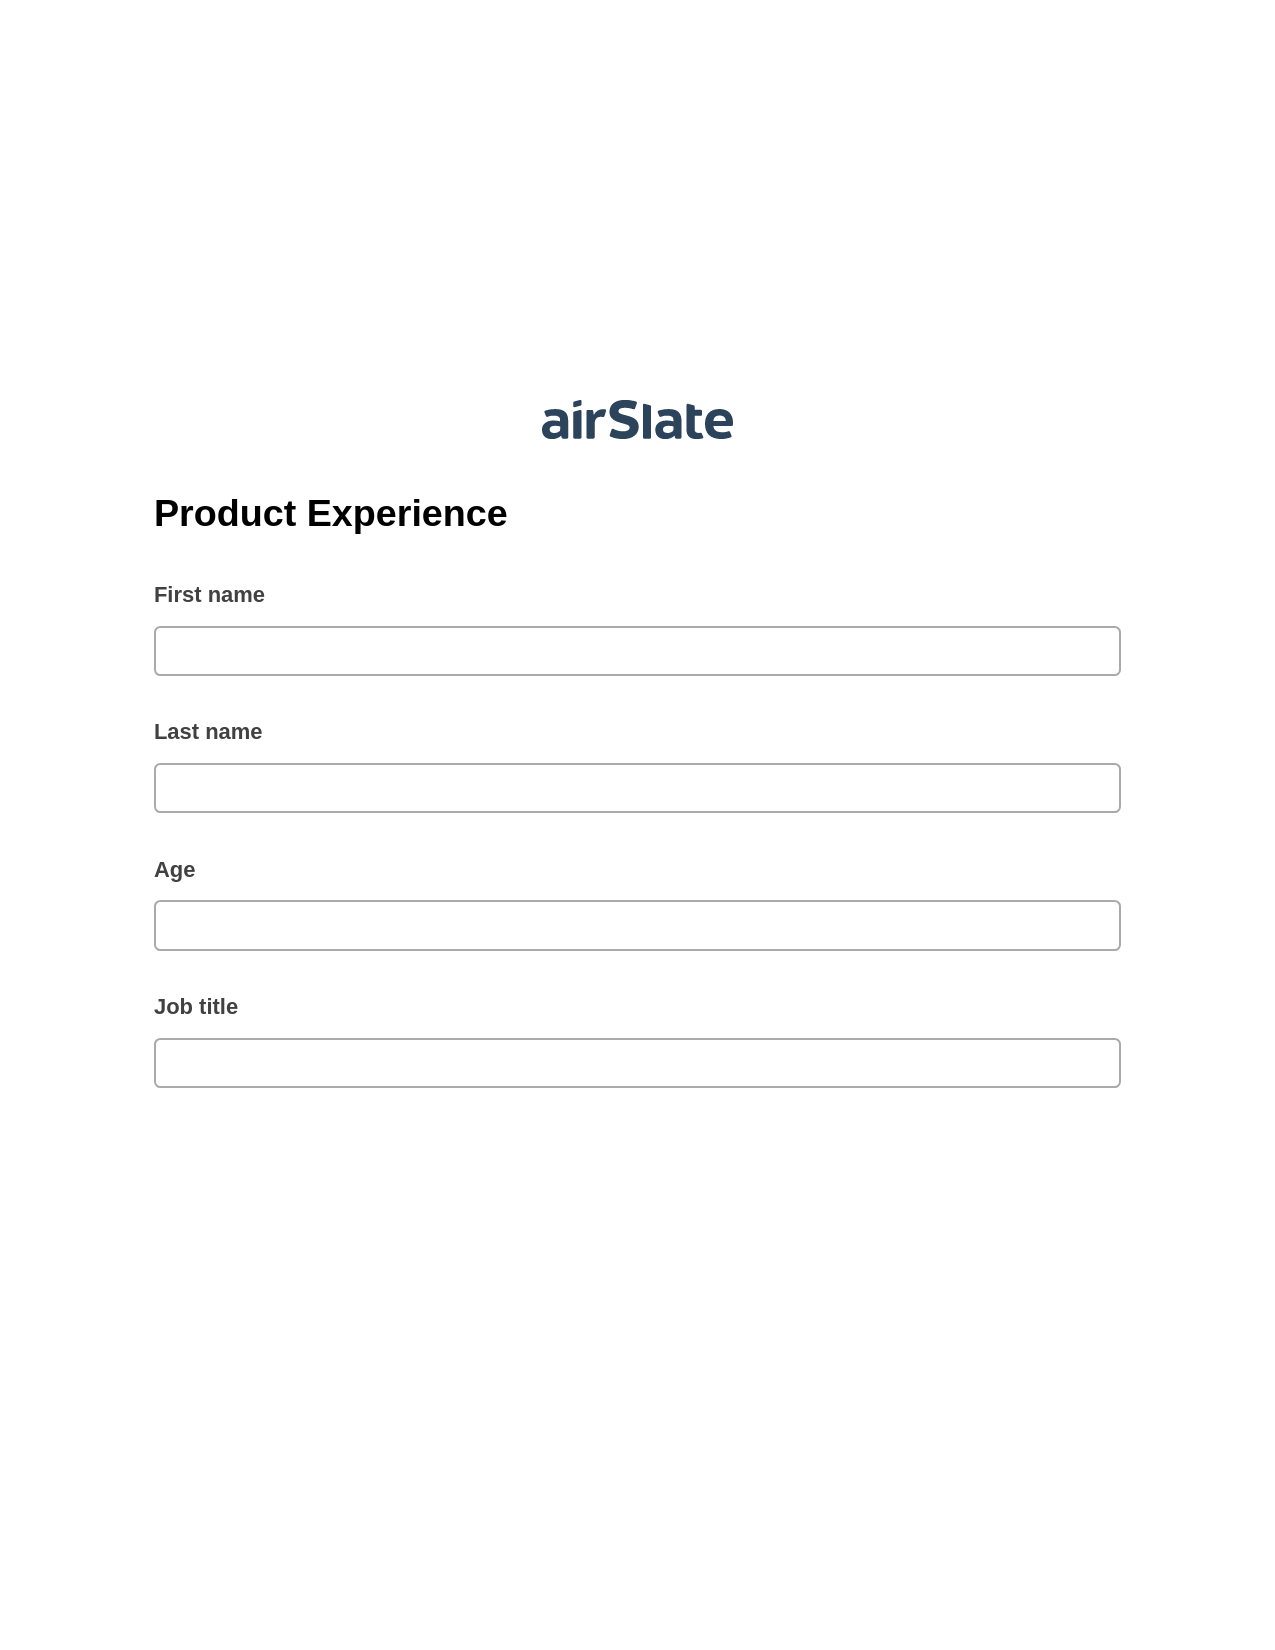 Multirole Product Experience Pre-fill from CSV File Bot, Send a Slate with Roles Bot, Webhook Postfinish Bot